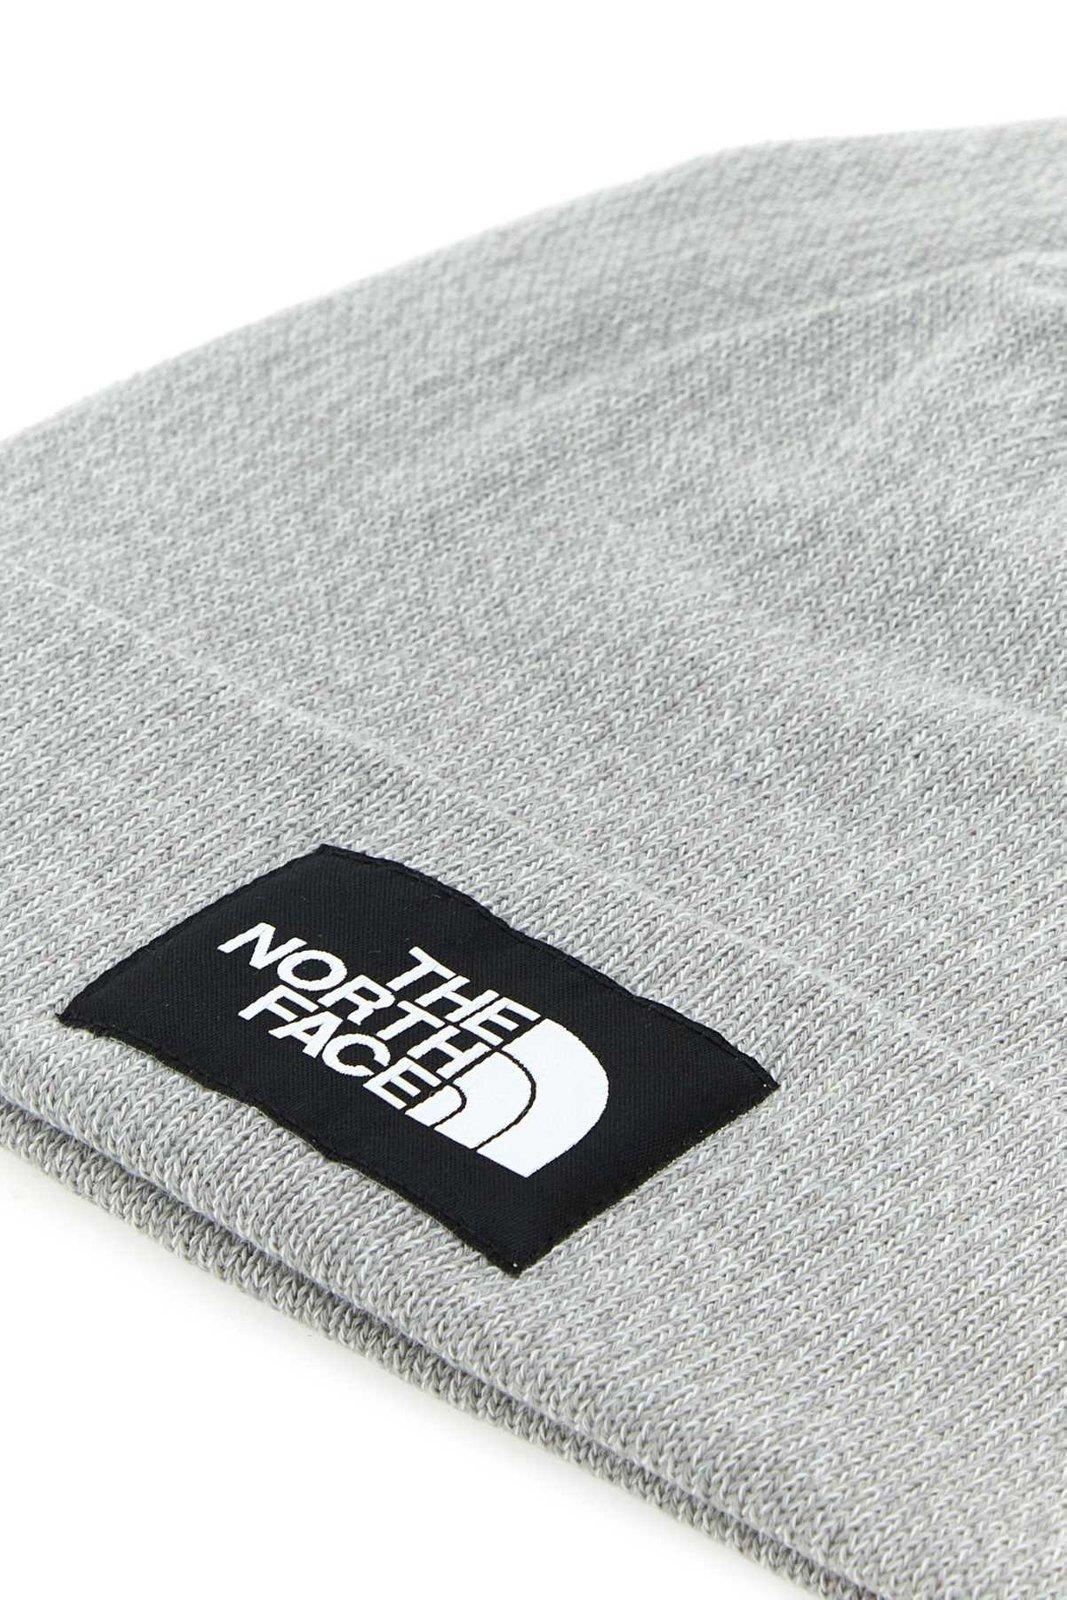 The North Face Cappello in Gray for Men | Lyst